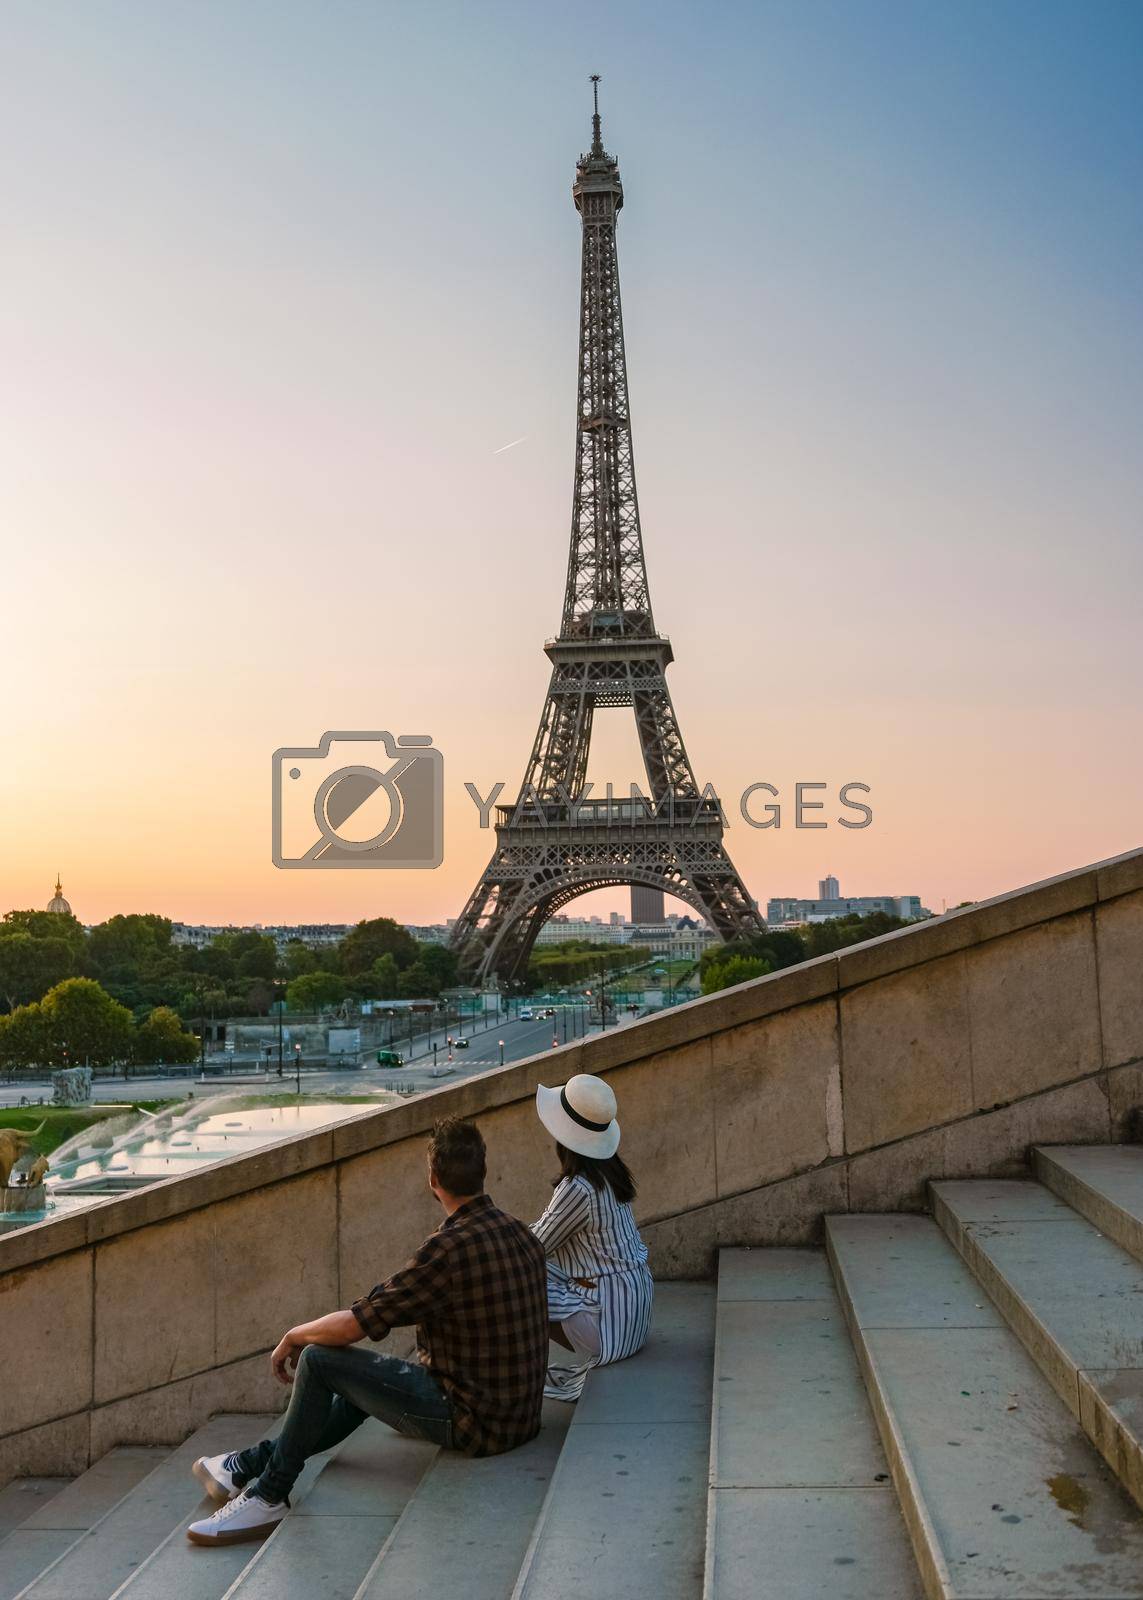 Royalty free image of Eiffel tower at Sunrise in Paris France, Paris Eifel tower on a summer day by fokkebok